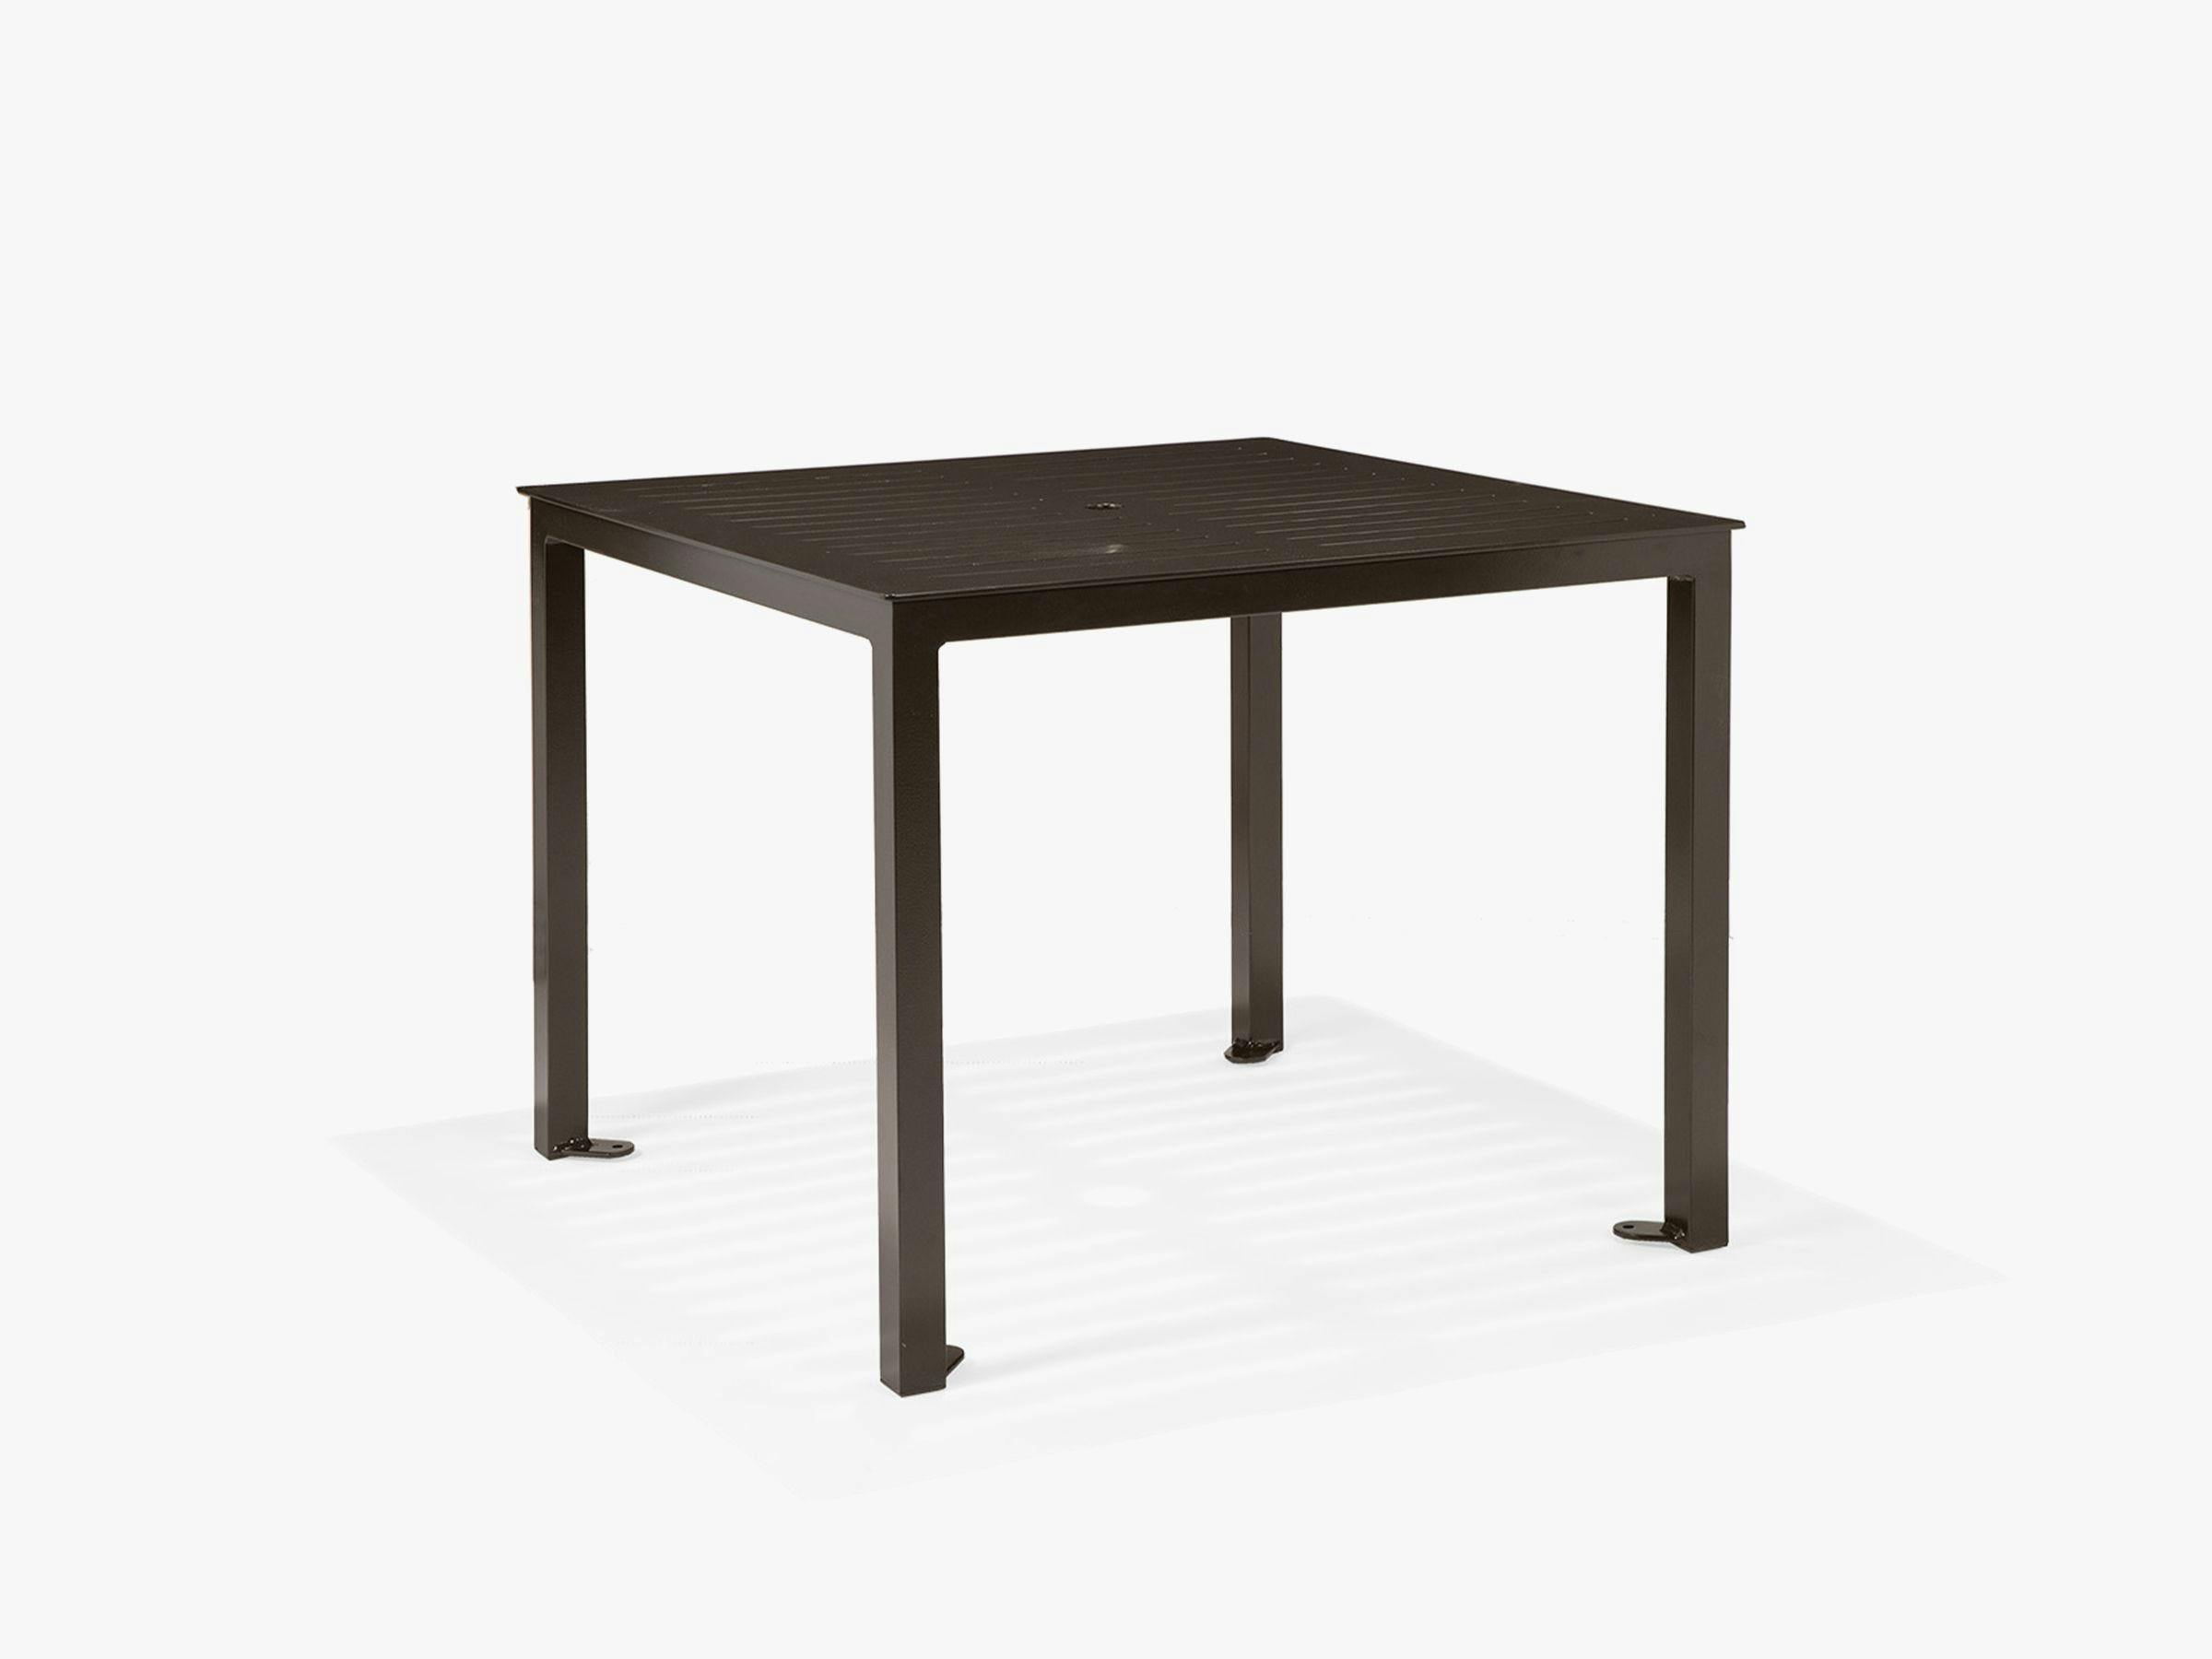 Portico 36" Square Dining Table